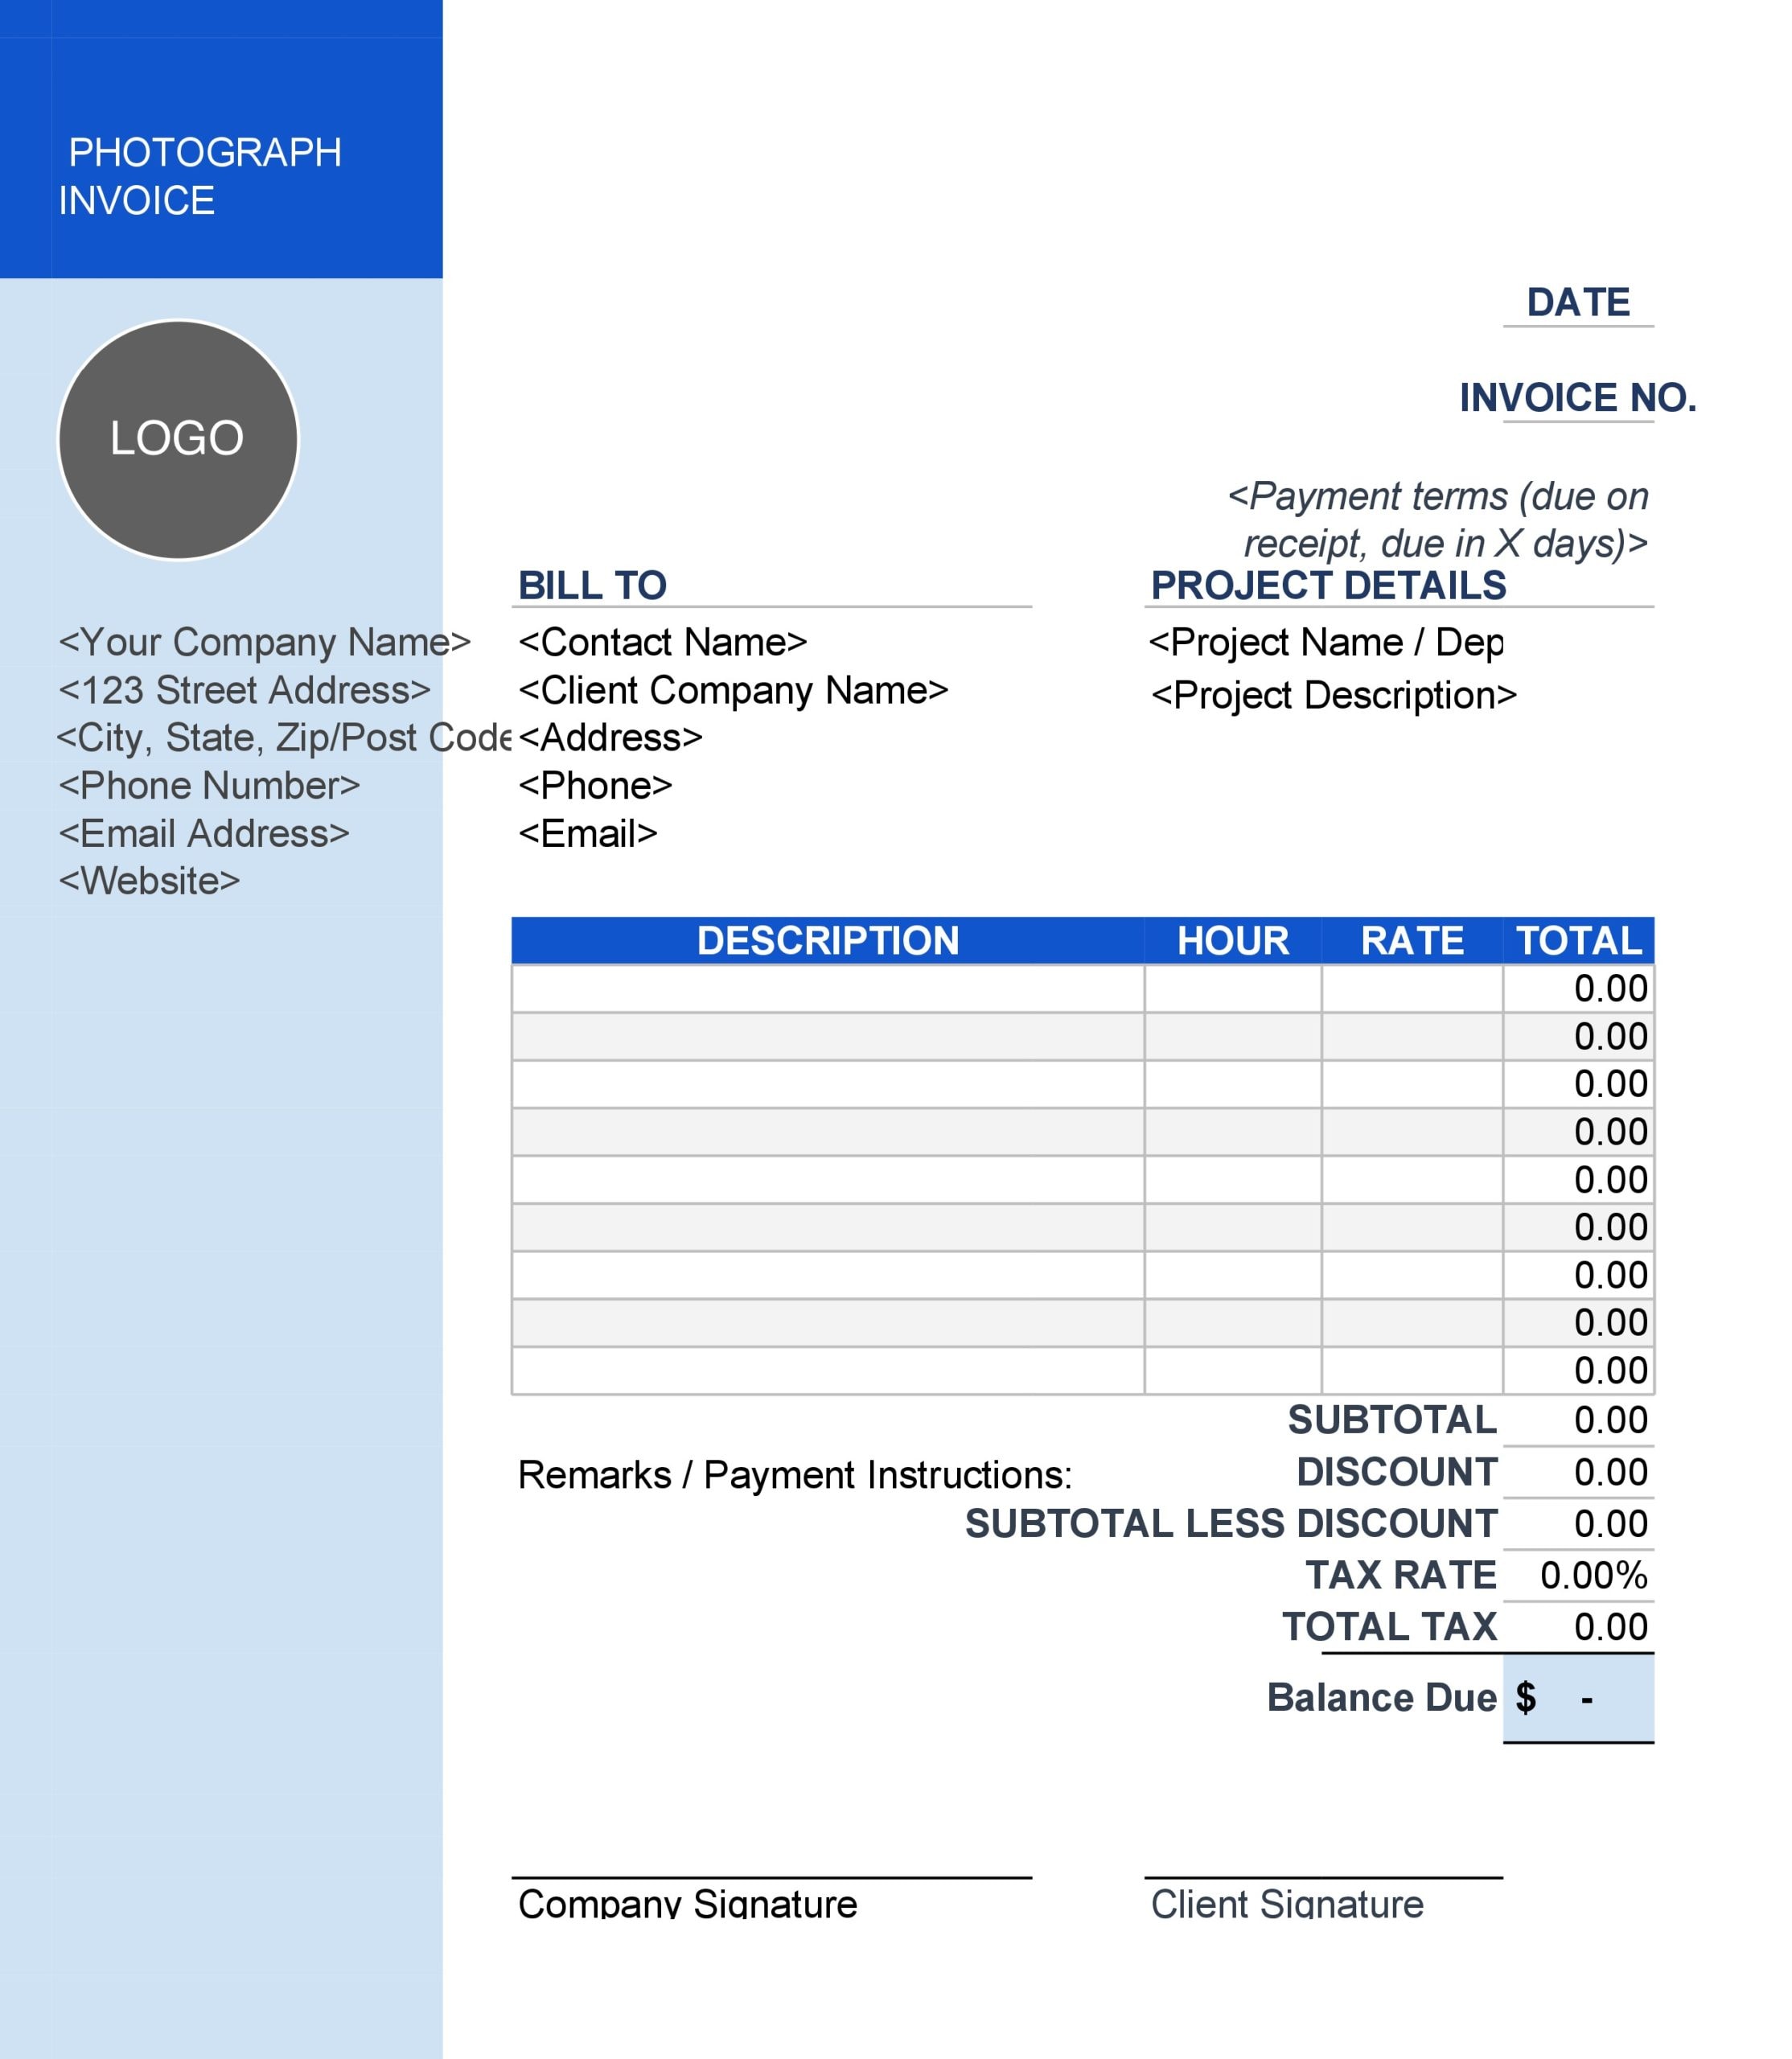 Get Photography Invoice Template Word Background Invoice Template Ideas